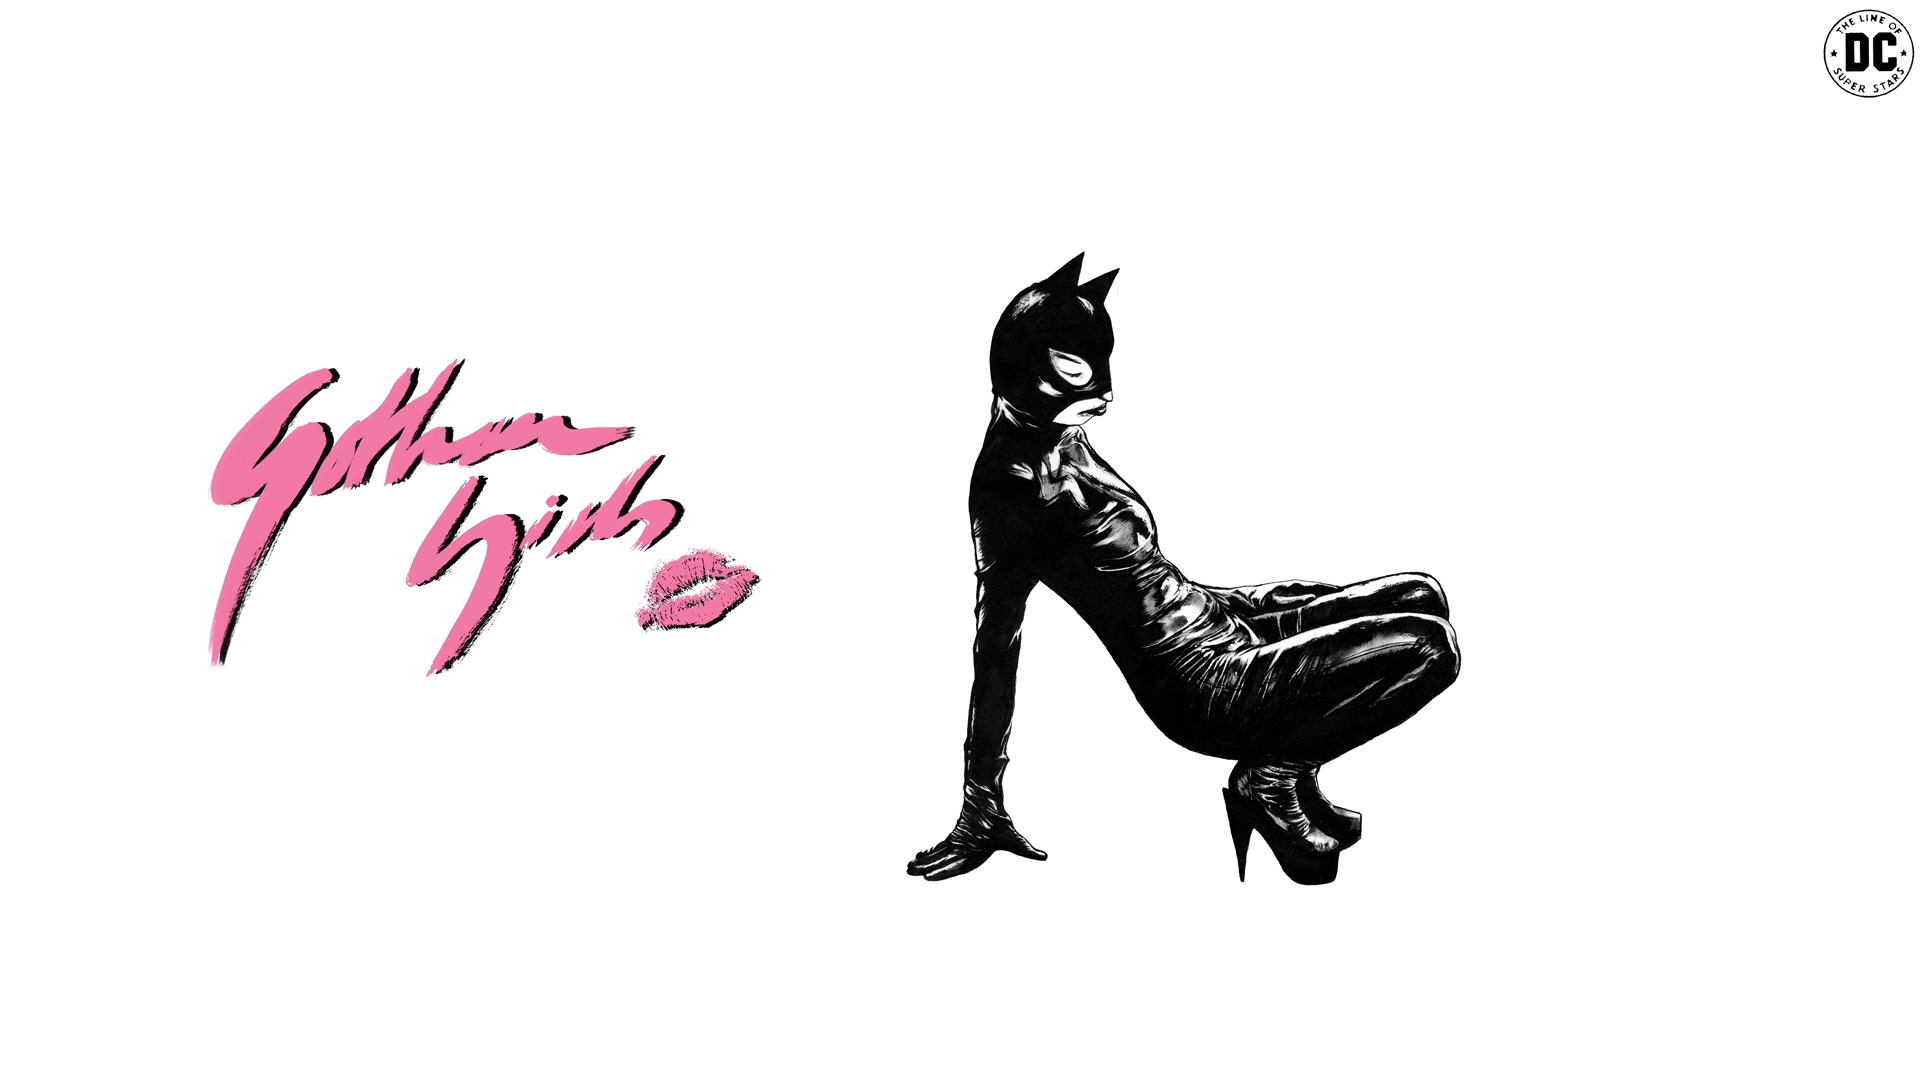 Catwoman 1920x1080